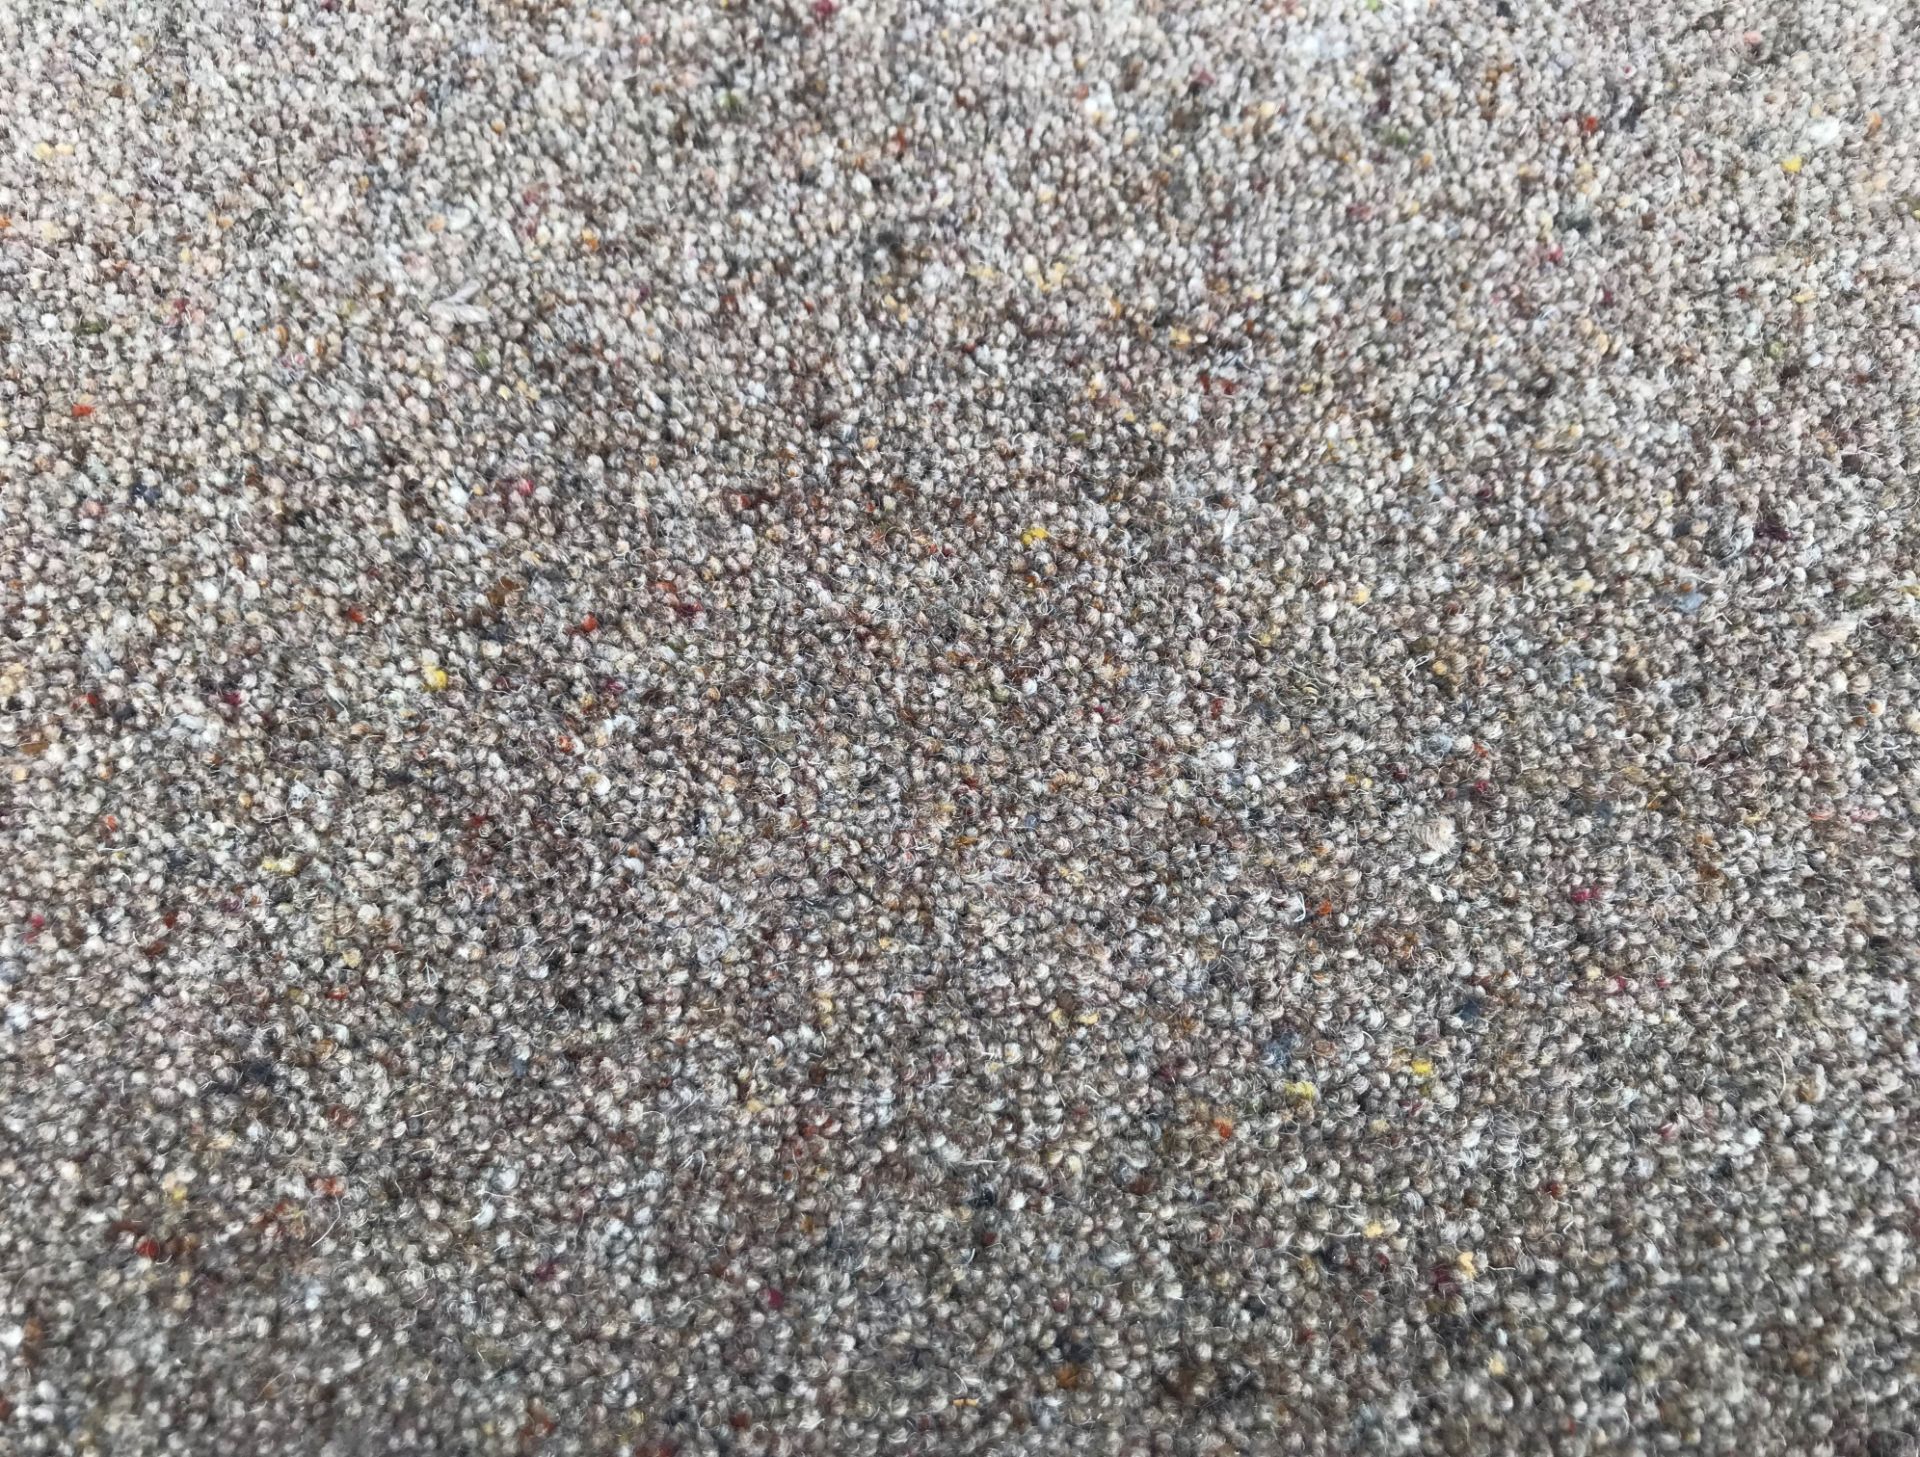 1 x Cormar Carpet Co - Natural Berber Twist Deluxe - Colour Rustic Clay - 25X4 Meter Roll - Rrp £ - Image 2 of 4